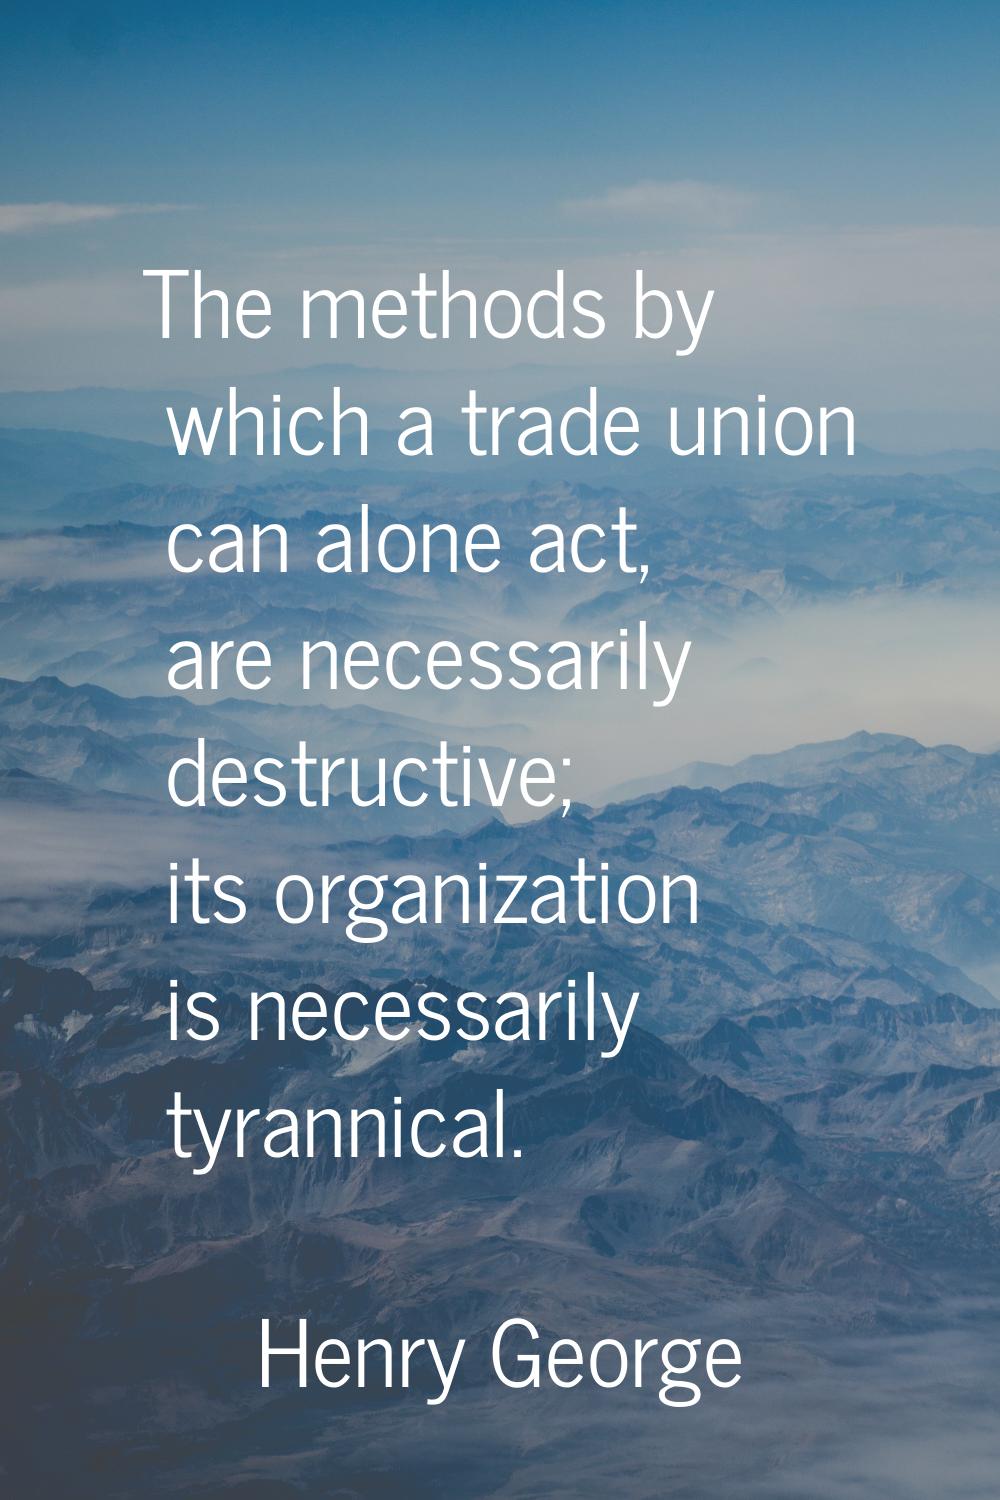 The methods by which a trade union can alone act, are necessarily destructive; its organization is 